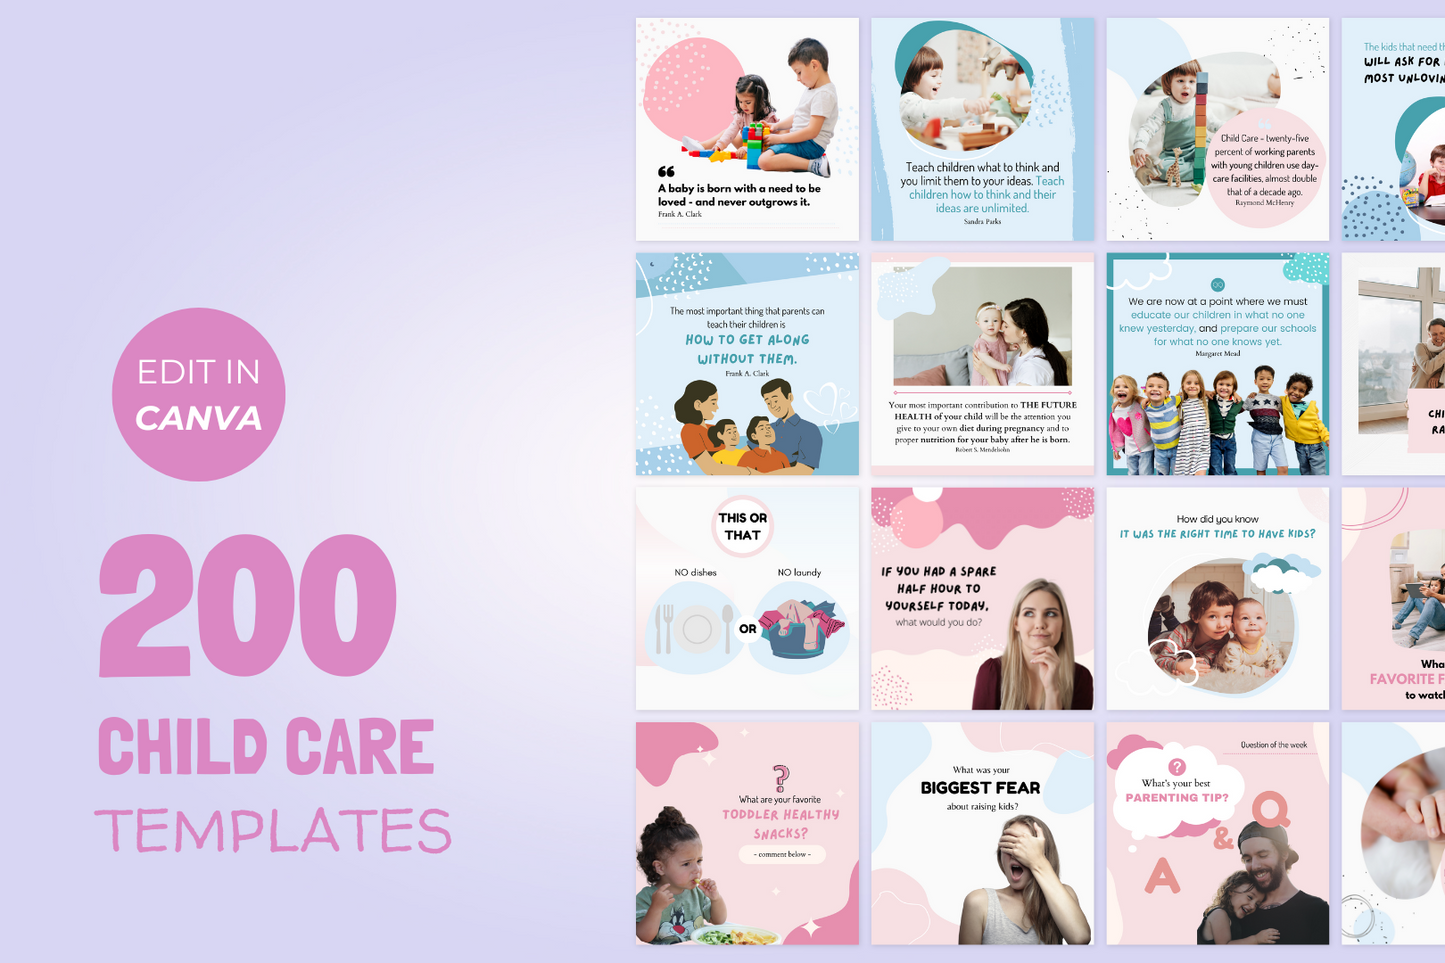 Daycare Social Media Posts - 200 Templates